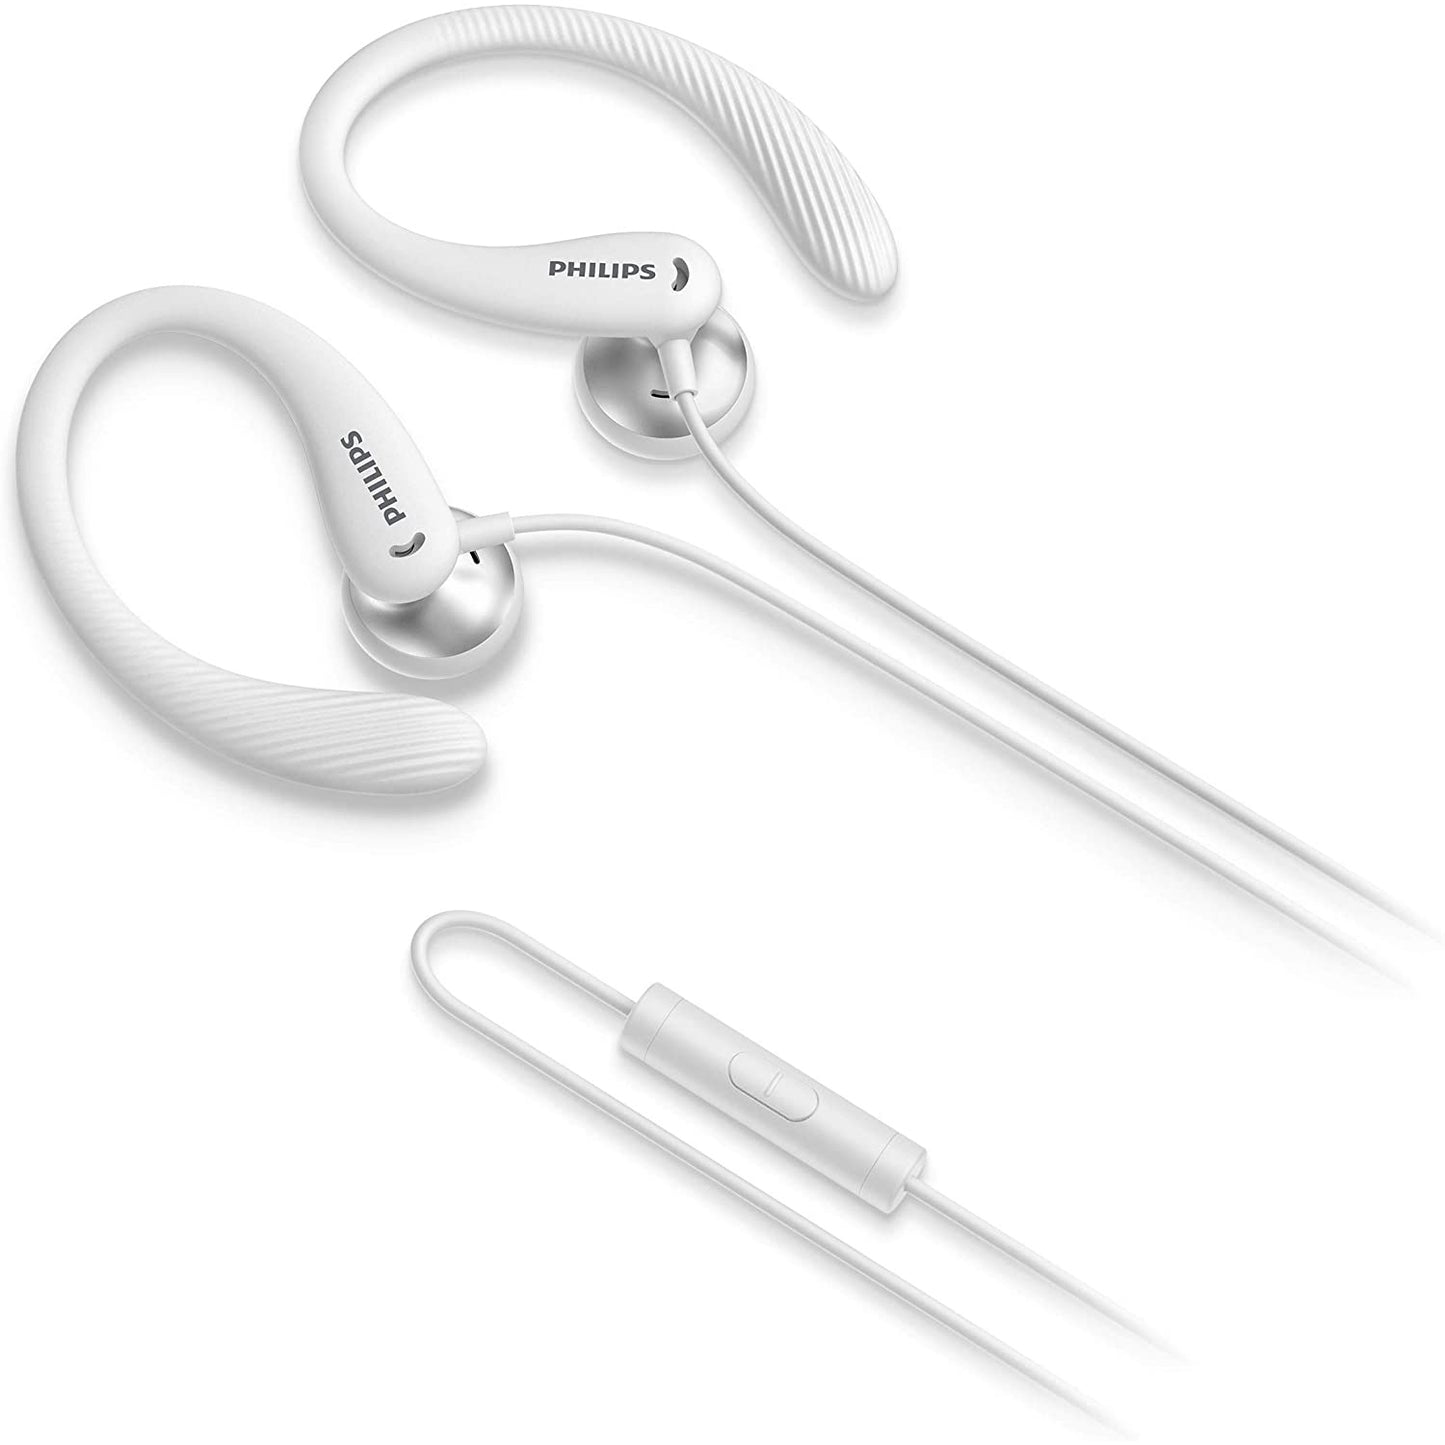 Philips Corded headphones for fitness and sports, earphones with microphone, IPX2 sweat and splash resistant, flexible ear loops, push button control, white